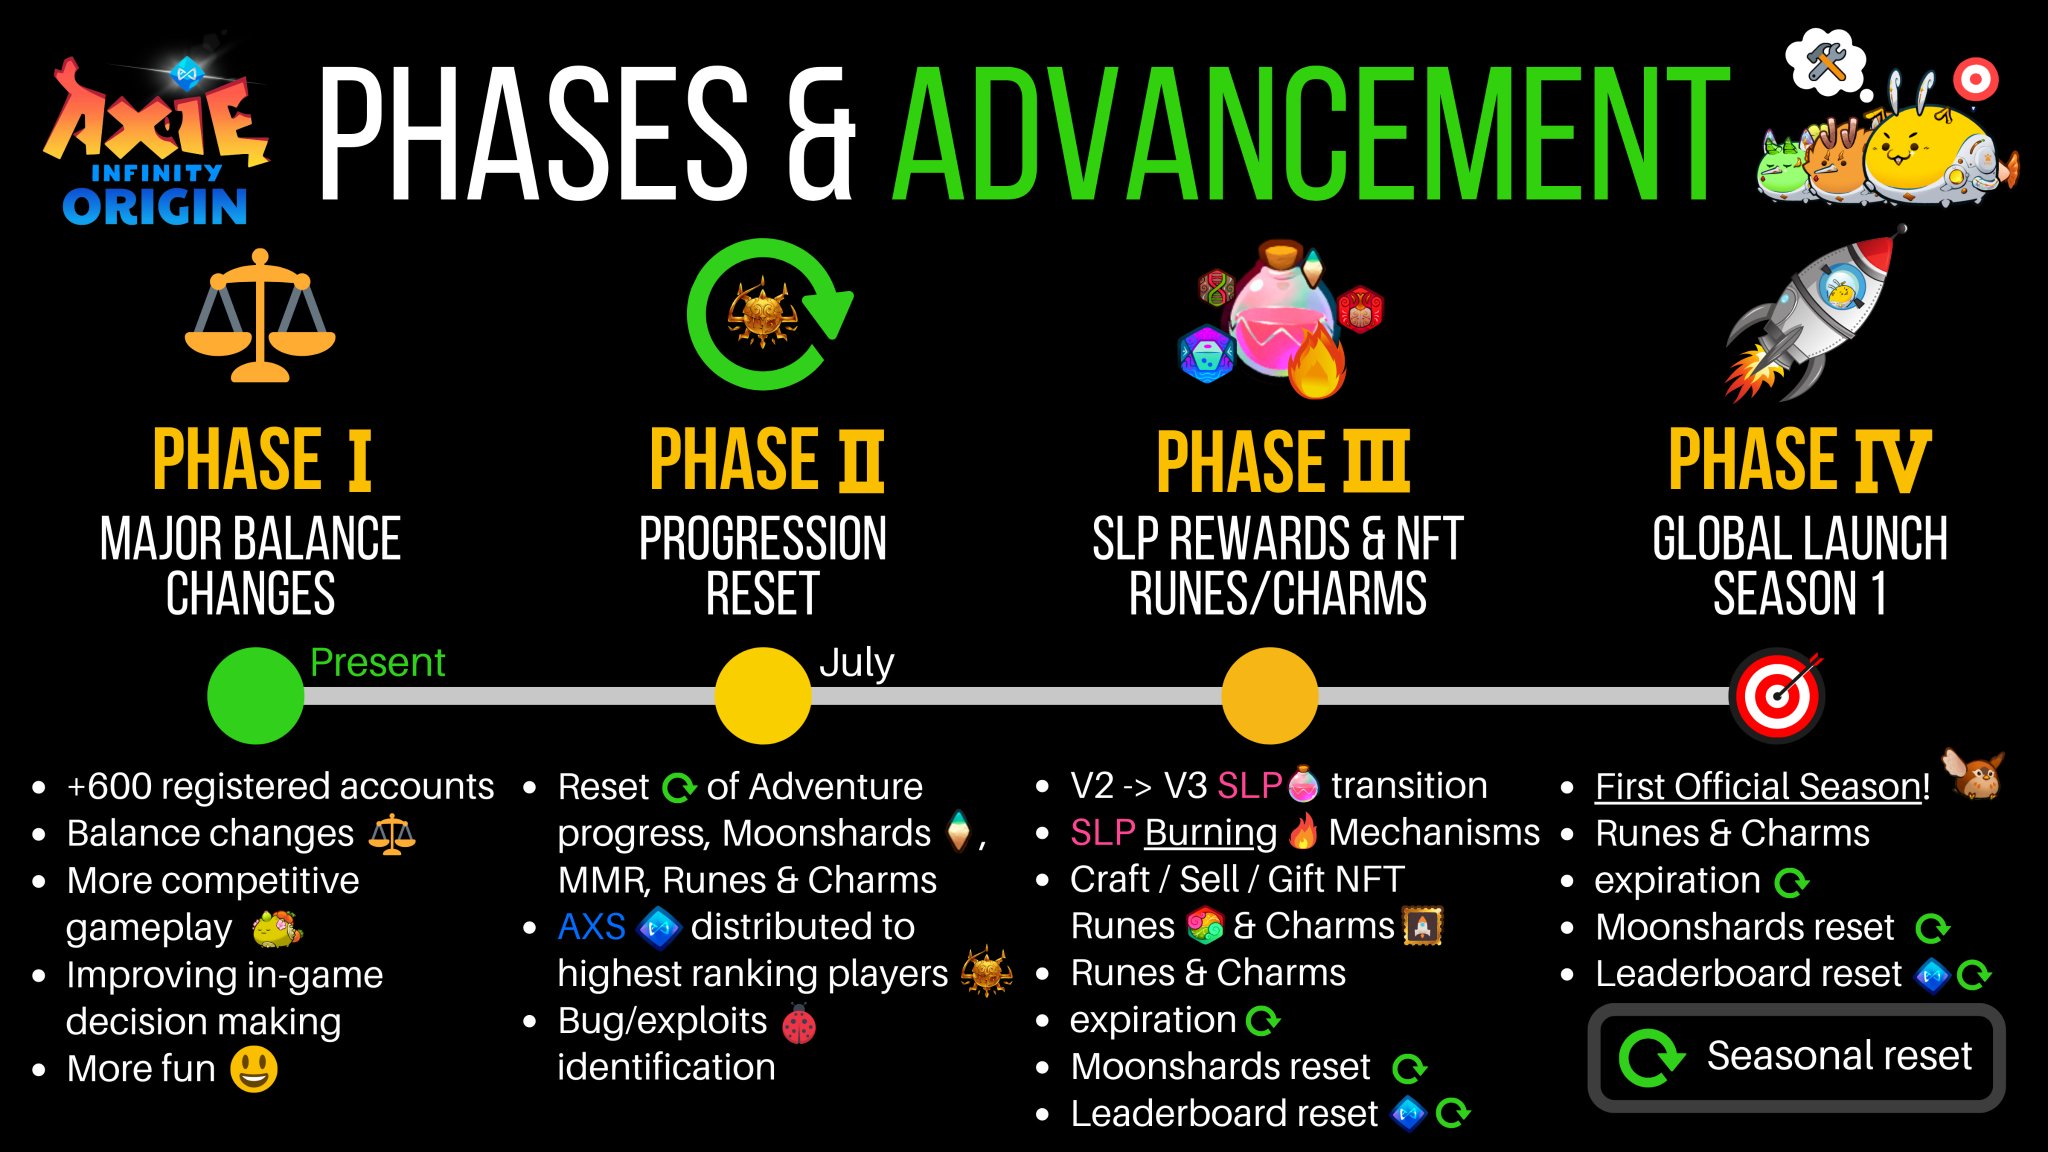 RT zioaxie: Origin: Phases and Advancement Plans 🛠️❤️ All next @AxieInfinity Origin Early Access updates.  4 Phases: -More Balance Changes ⚖️ -How's gonna be the seasonal reset? -#SLP into V3 / NFT Runes & Charms -Global Launch 🚀  Full article here, please read it 👇 [axie.substack.com] [twitter.com] [pbs.twimg.com]